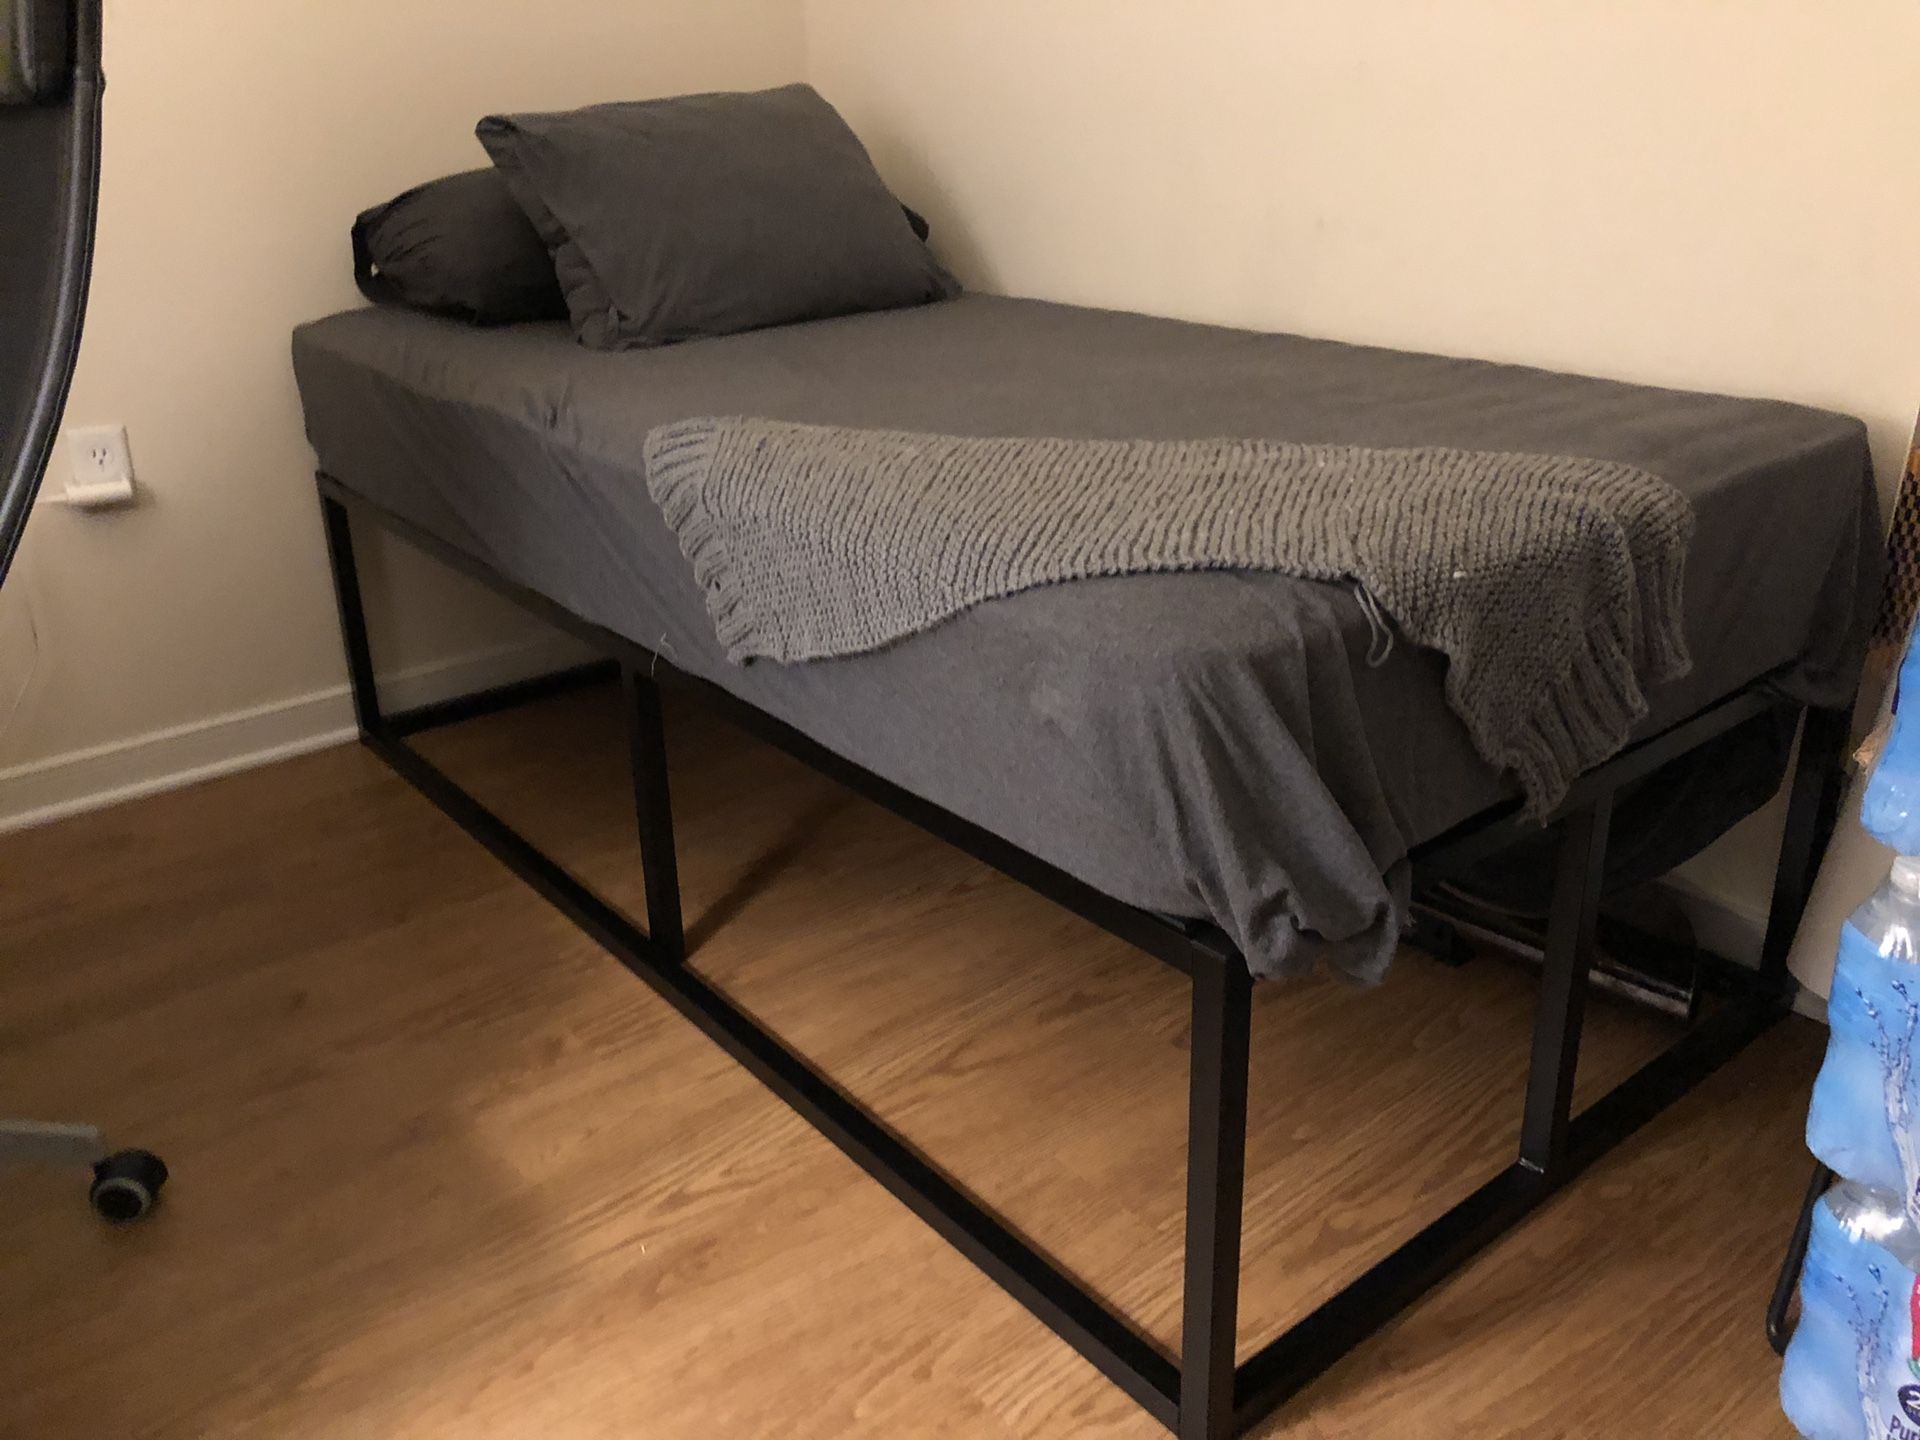 Great spacious bed frame and mattress